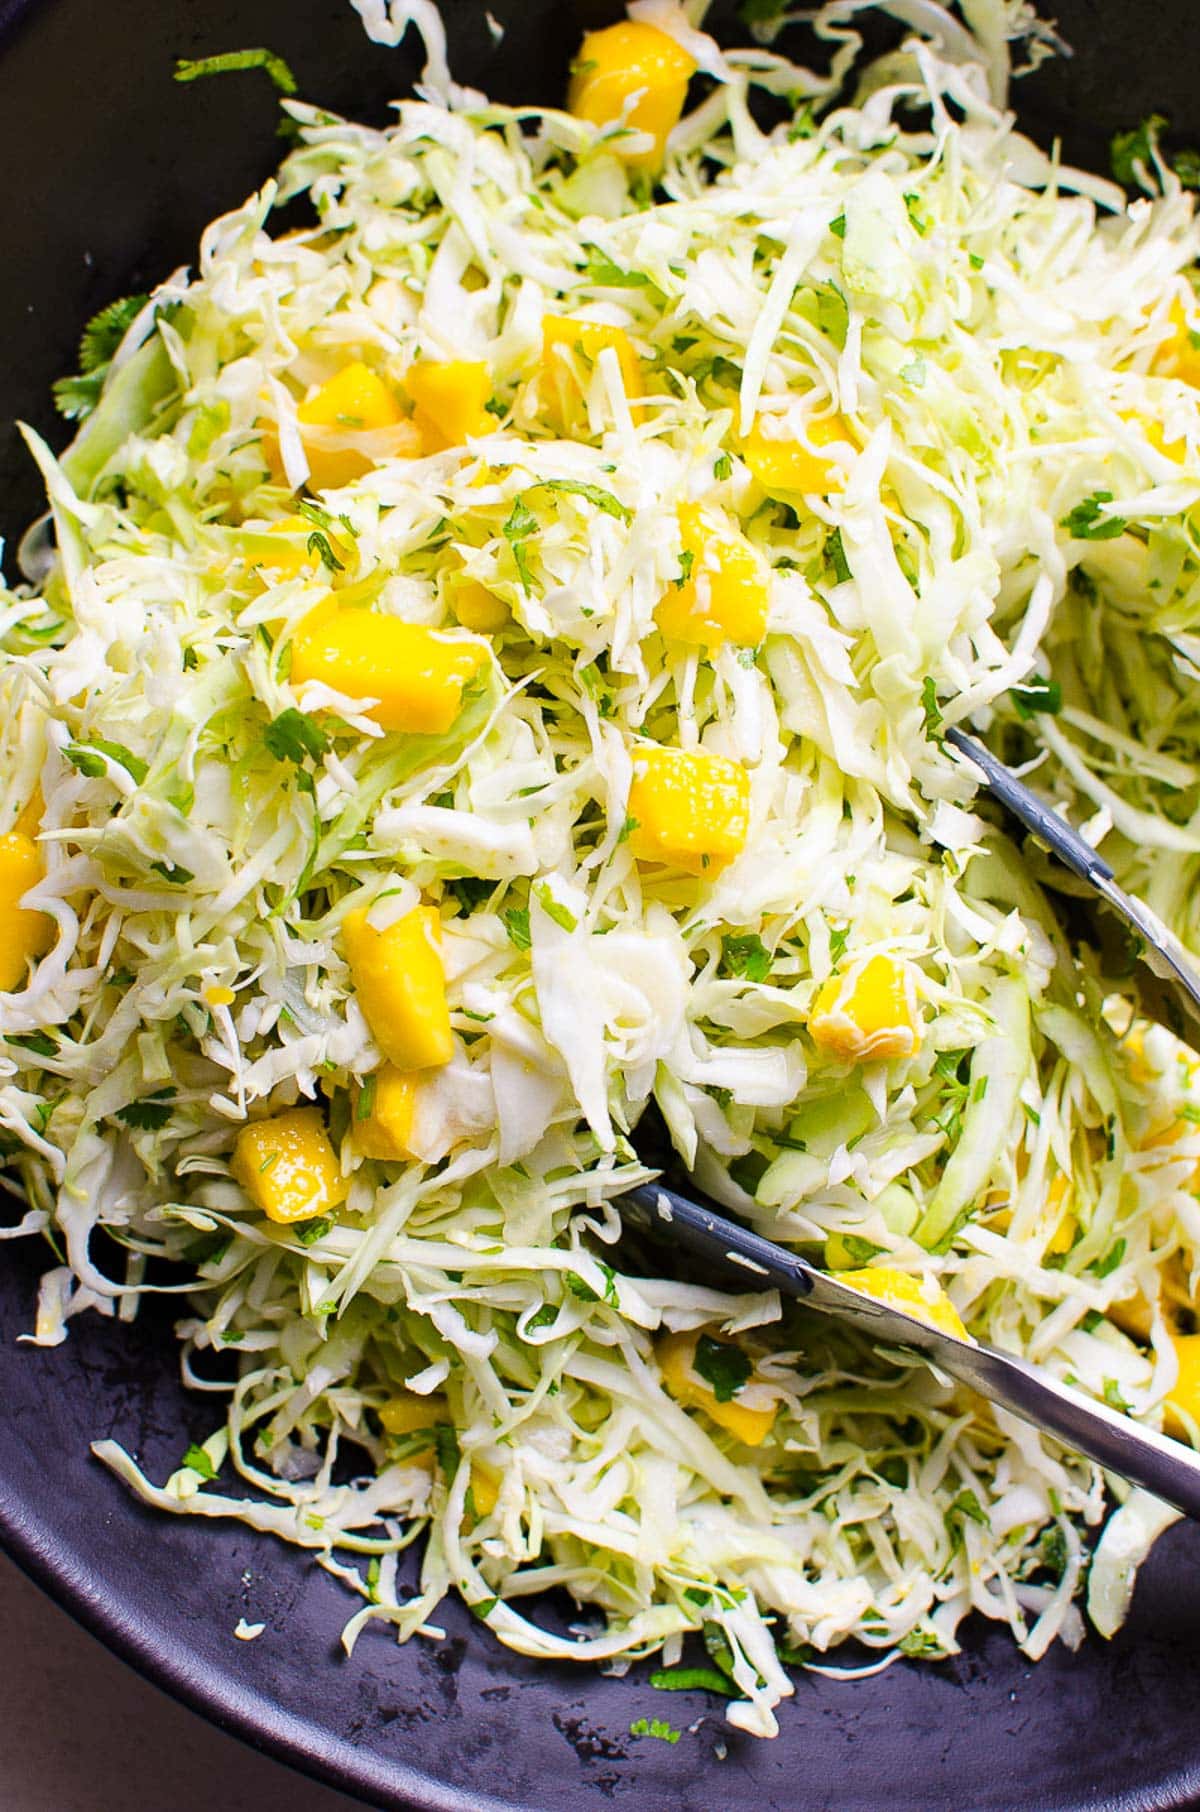 Mango slaw served in a black bowl with tongs.